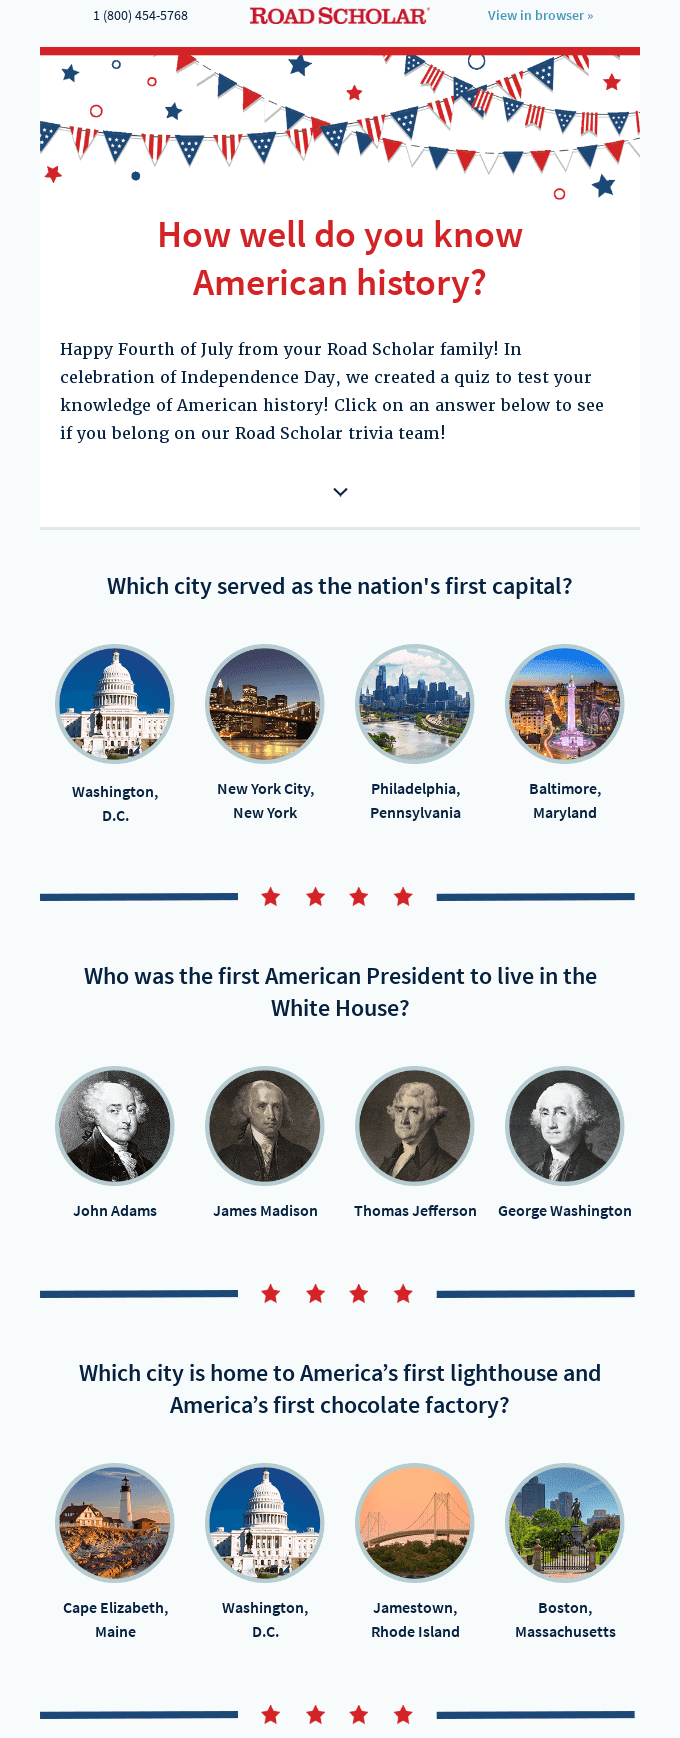 4th_of_July_email_example_quiz